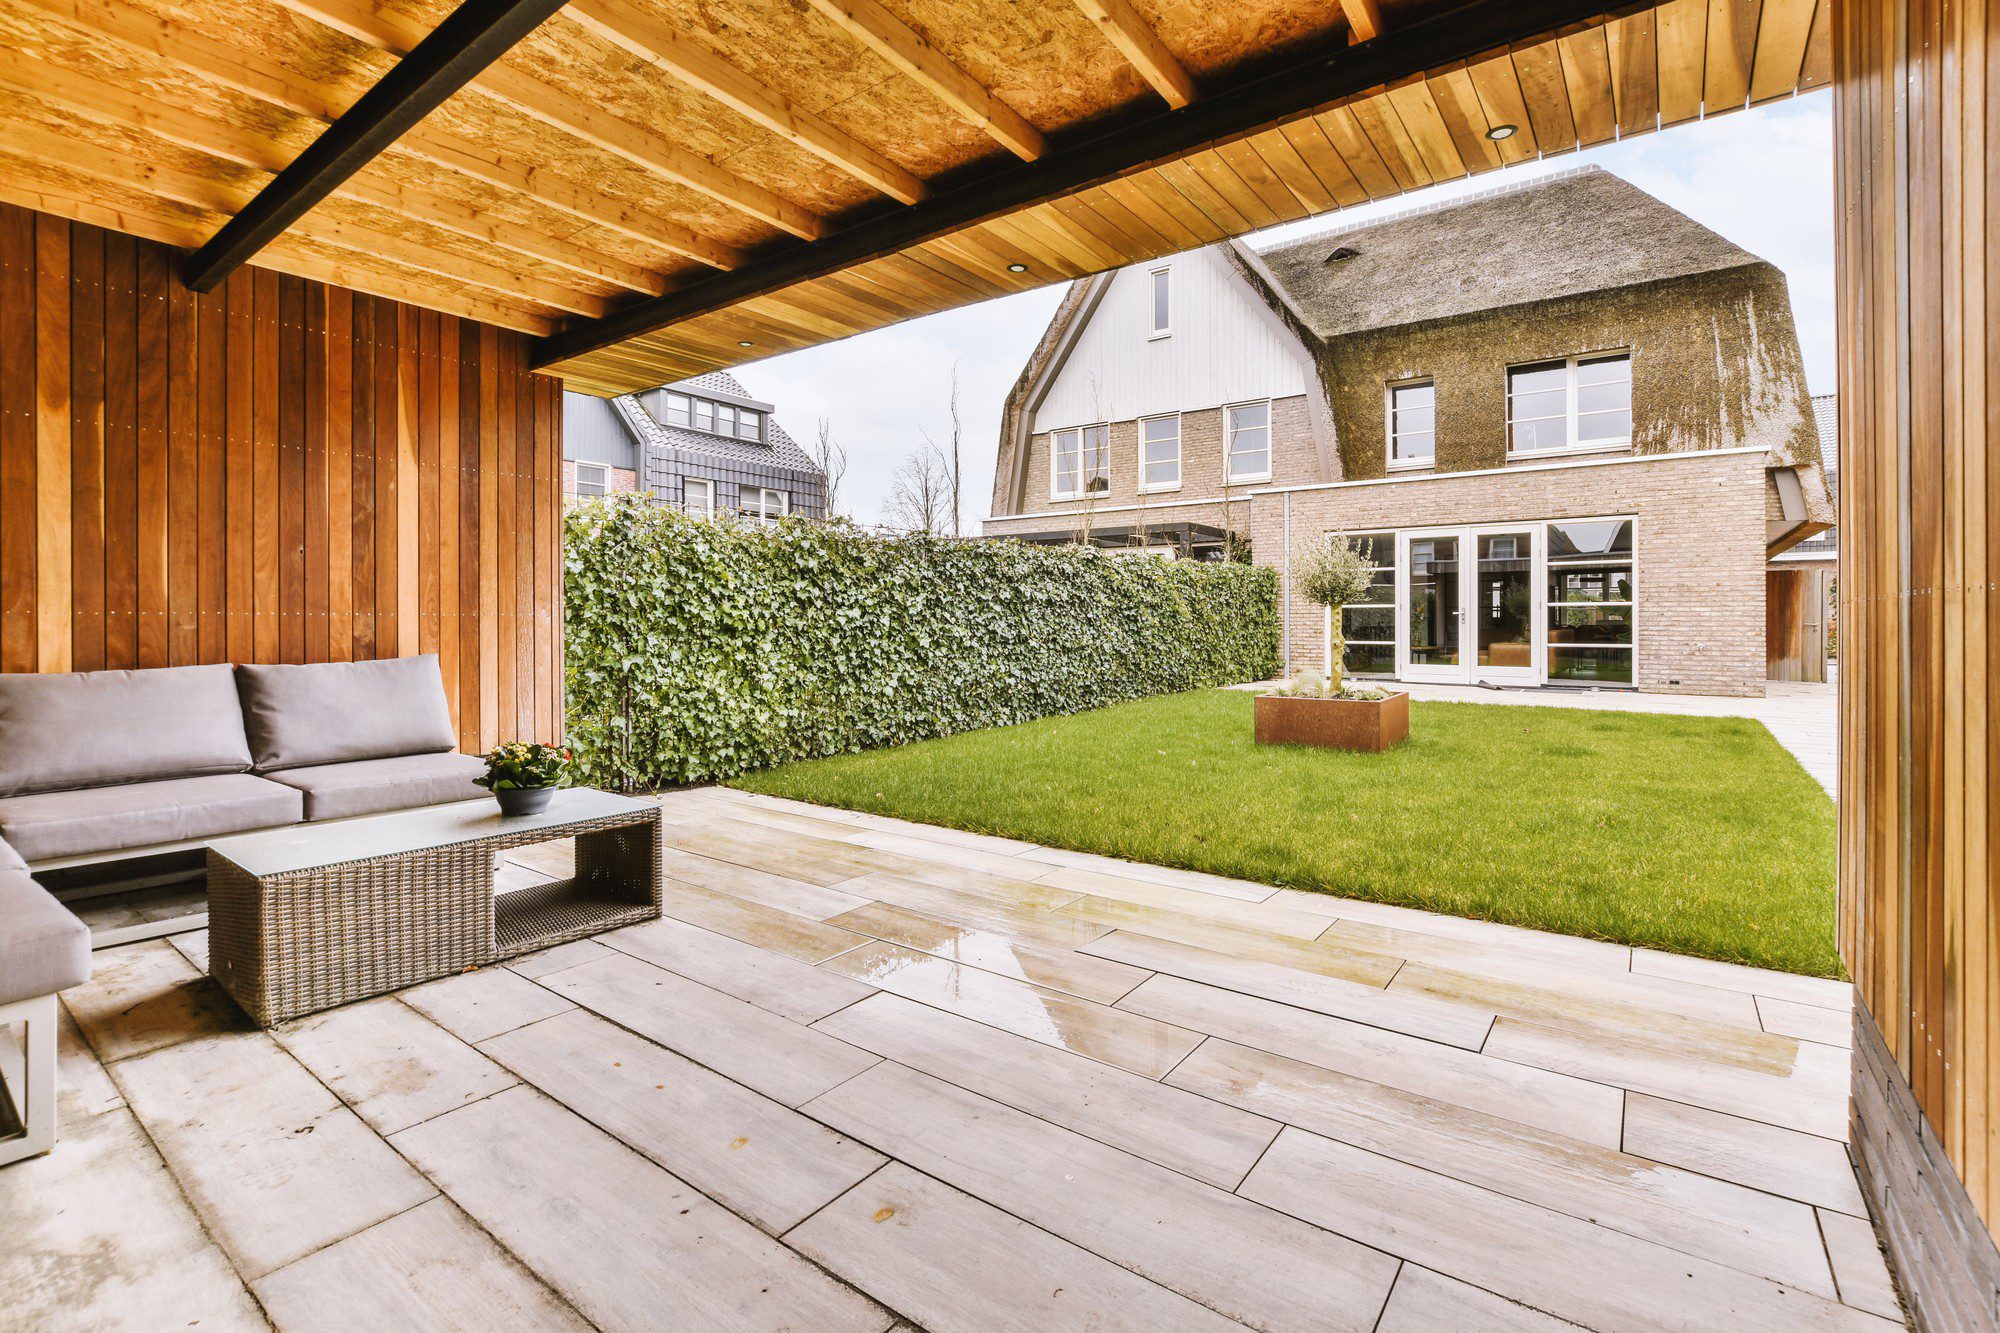 The image shows a modern backyard with a well-maintained garden space. Here are the key features visible in the image:1. A covered patio area with a wooden ceiling and beams that create a cosy outdoor space.
2. An outdoor lounge set consisting of a sofa with cushions and a matching wicker coffee table, suitable for relaxation and social gatherings.
3. A neatly trimmed green lawn that serves as the central garden area.
4. A wooden fence or wall on one side that provides privacy and enhances the aesthetic appeal with its vertical wood planks.
5. Paving stones that create a path and define the patio area, showing some water puddles which suggest recent rain.
6. A hedge that acts as a natural boundary on the other side of the garden, offering a lush green backdrop.
7. A large, modern house with big glass windows and doors, allowing plenty of natural light inside and ensuring a view of the garden from indoors.
8. A smaller raised bed or planter box with what appears to be small shrubs or plants, adding a touch of landscaping to the setting.The overall appearance is of a well-designed, contemporary outdoor living space that blends comfort with nature.